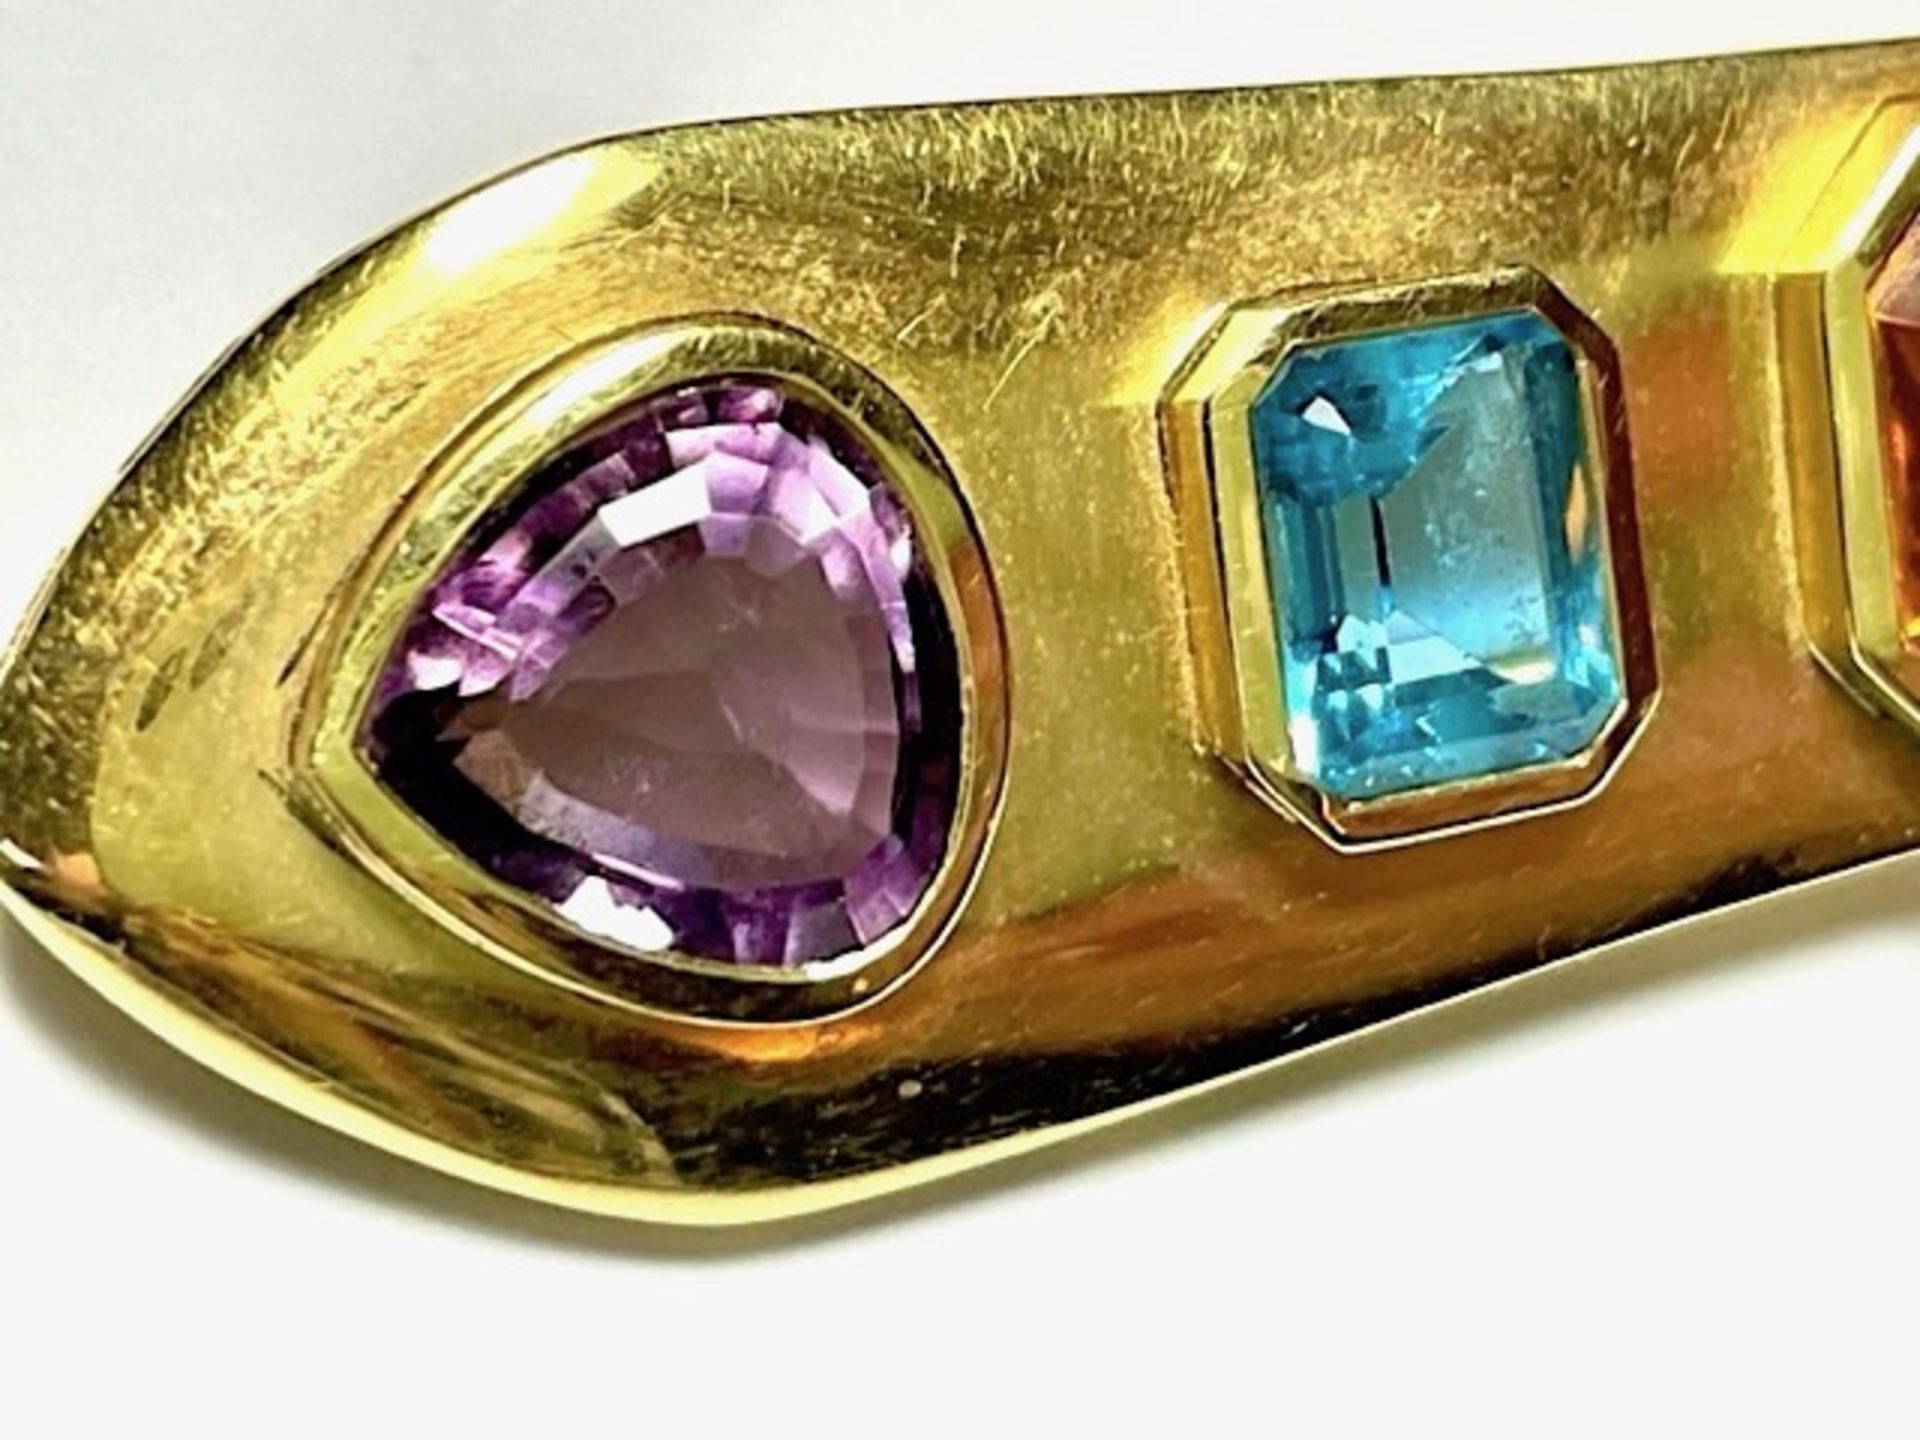 Pin with citrine, blue topaz and amethyst - Image 11 of 12